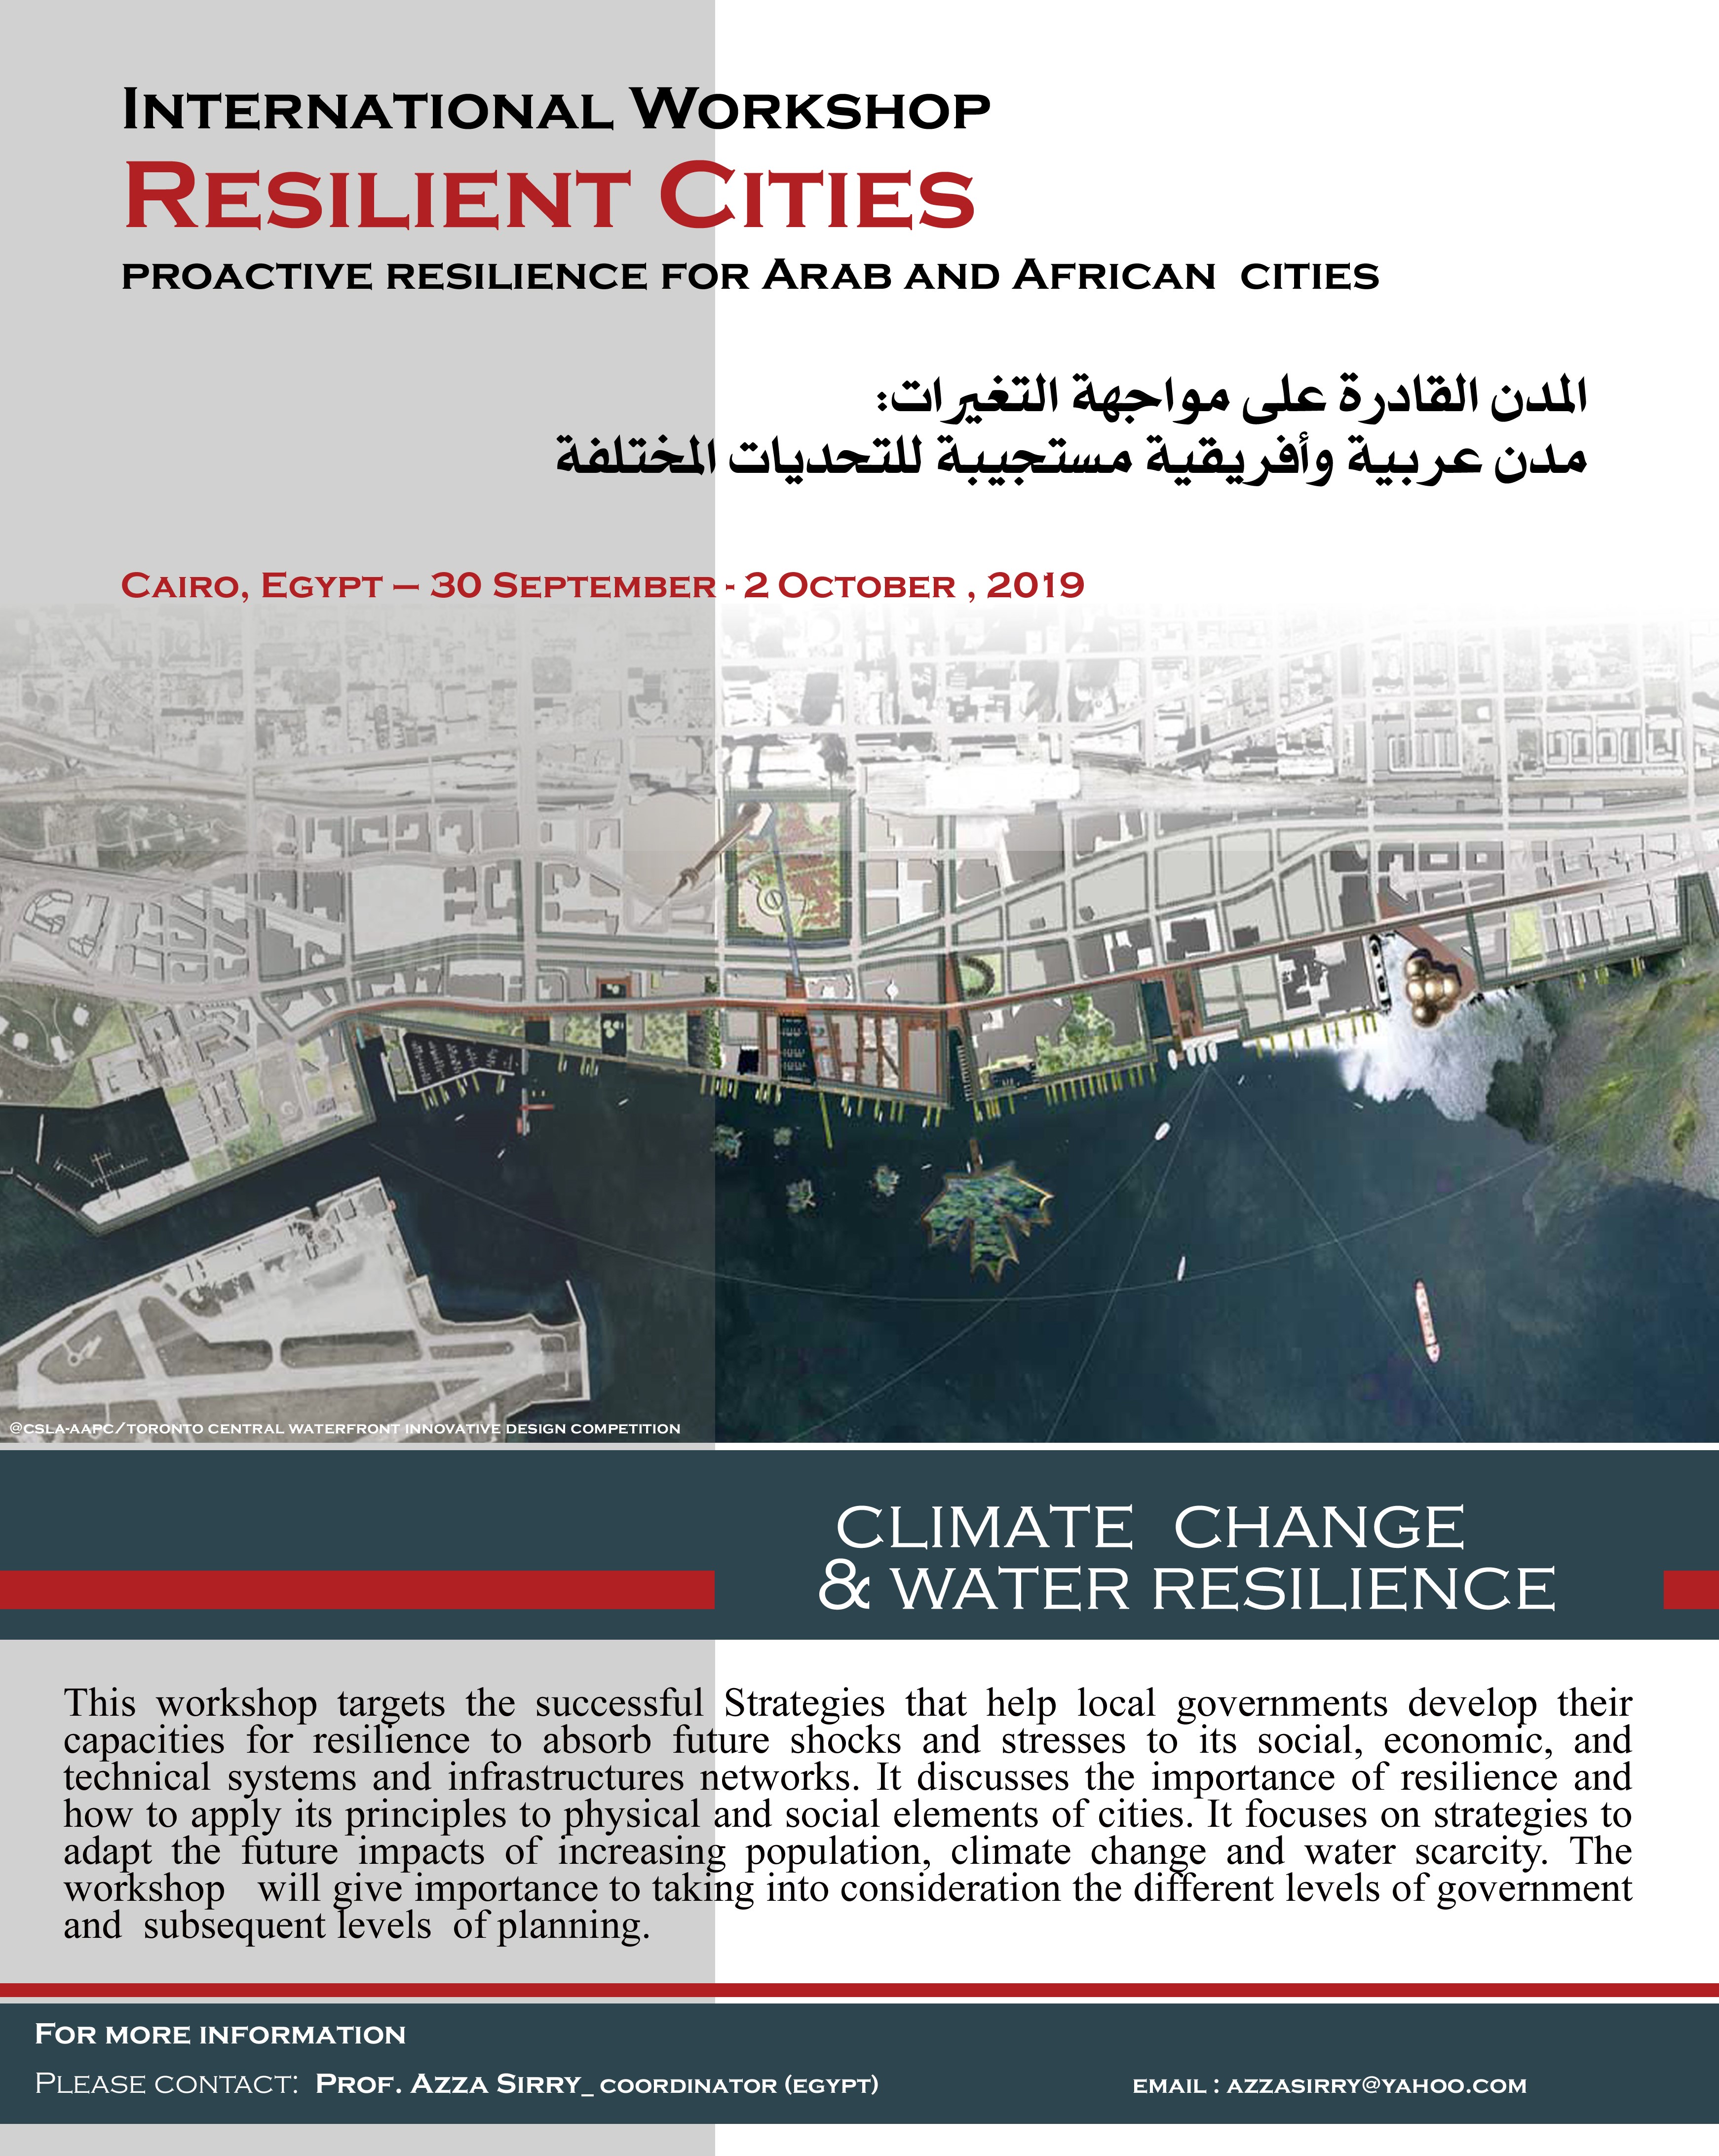 Resilient-cities-workshop-cairo-2019